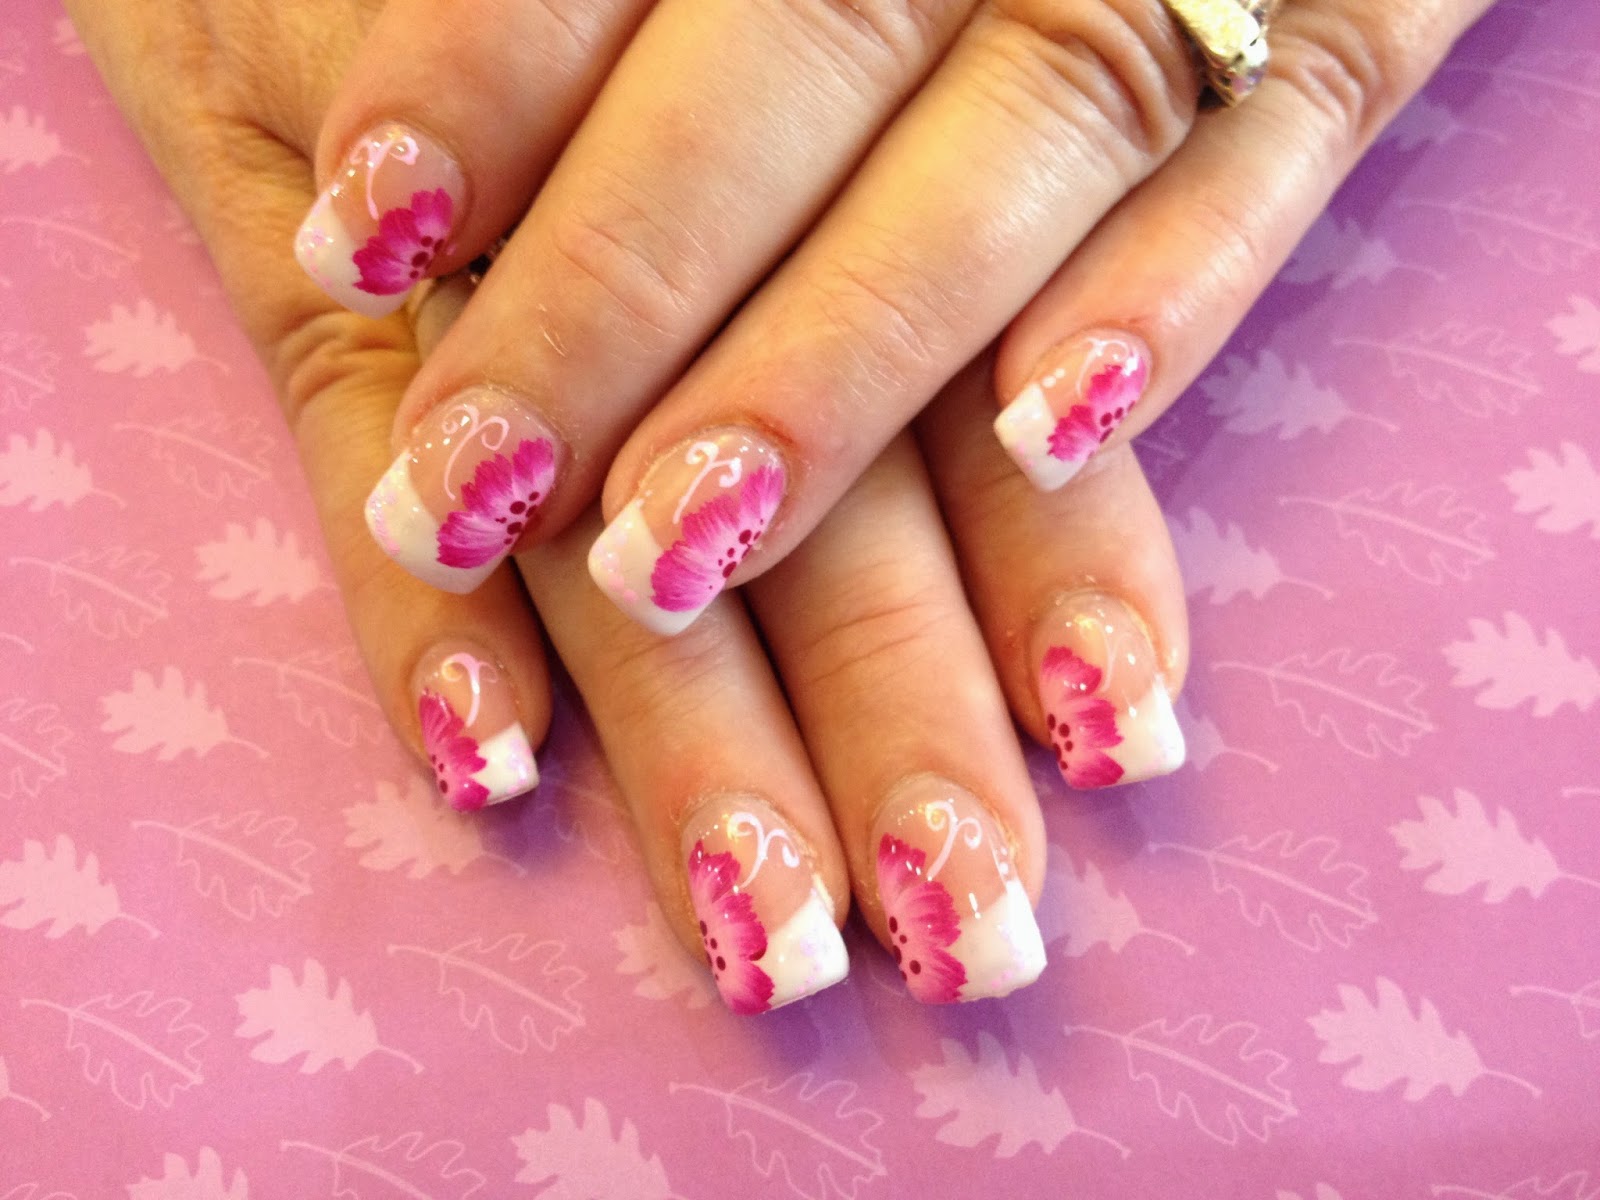 French Nail Art with Flowers - wide 5